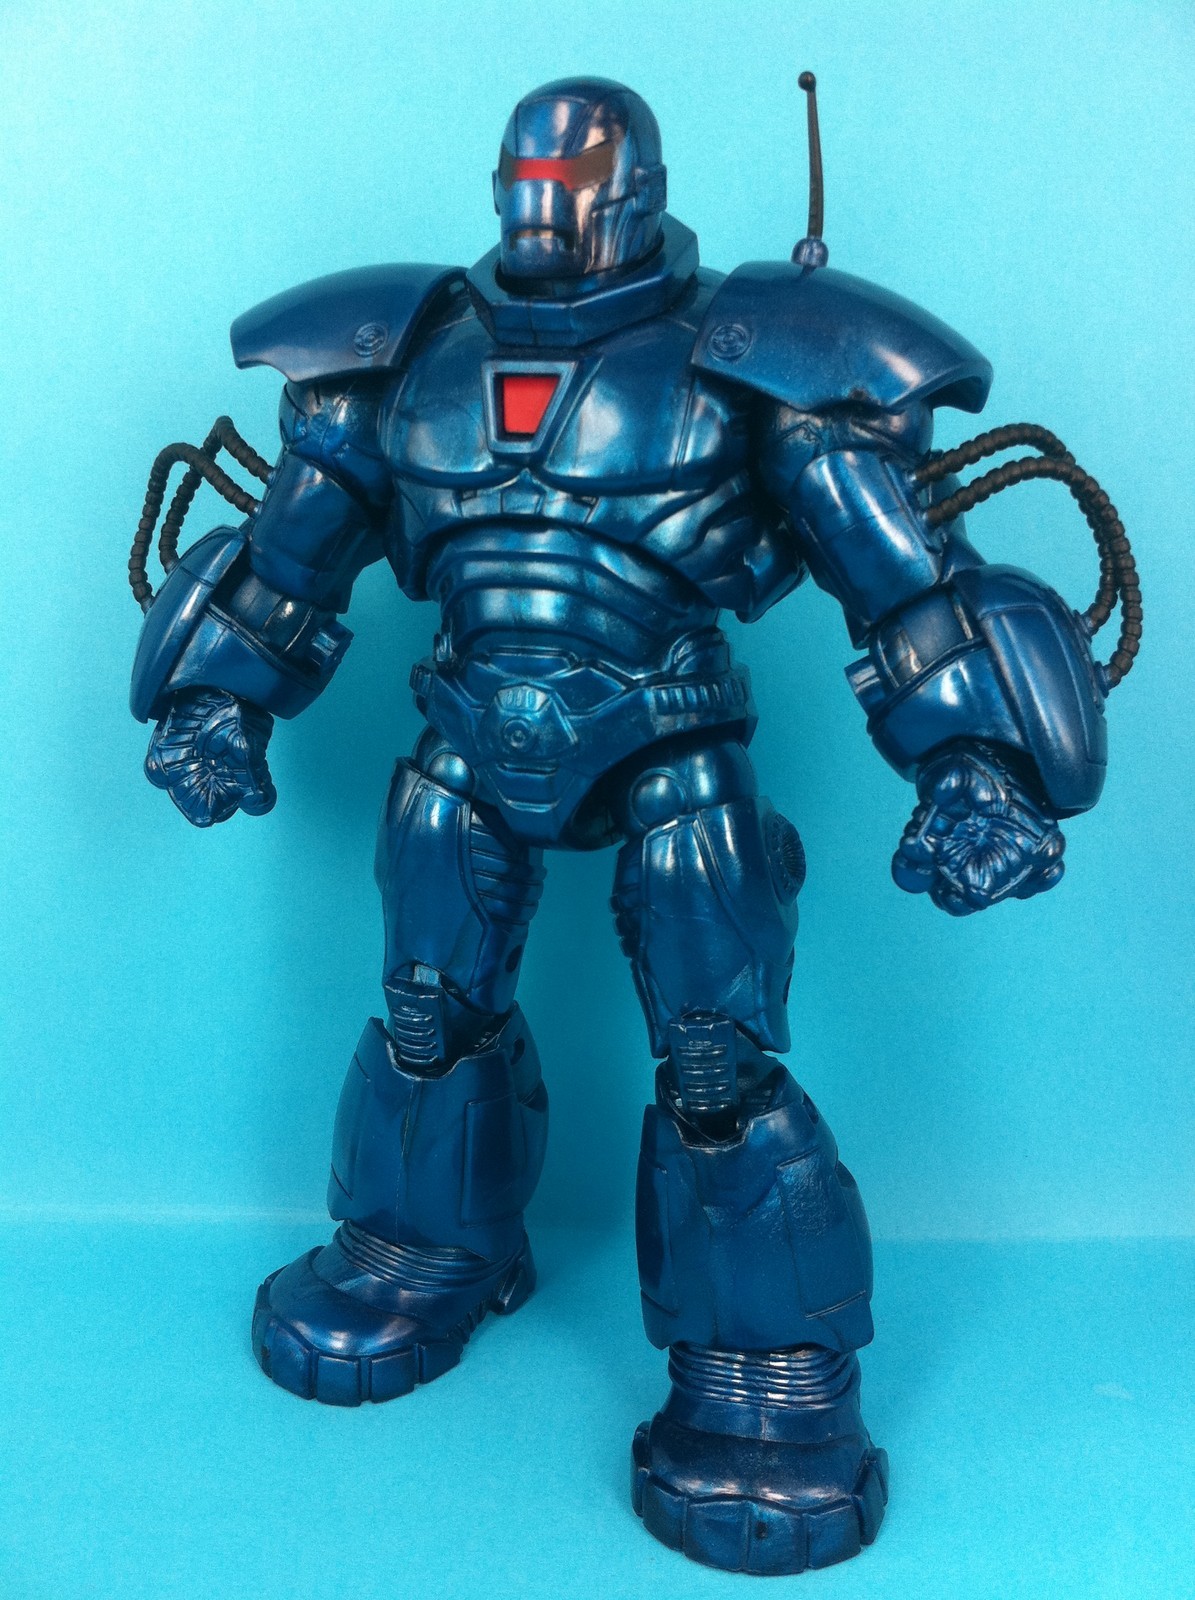 Check Out Wave 2 of Iron Man Legends at these eBay